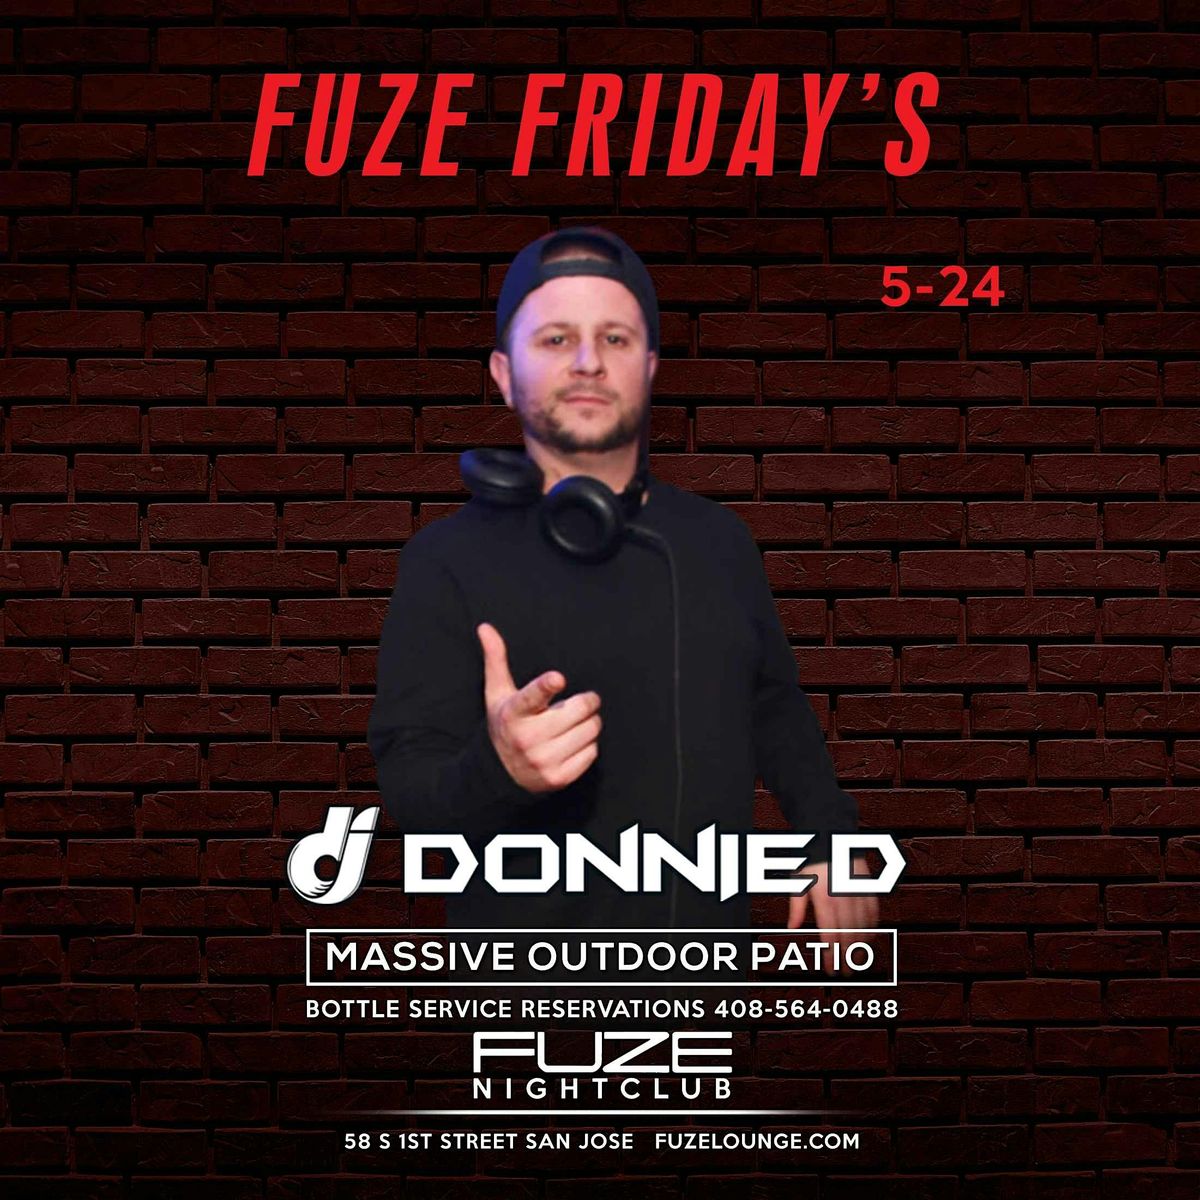 FUZE FRIDAYS  MAY  24TH DONNIE D